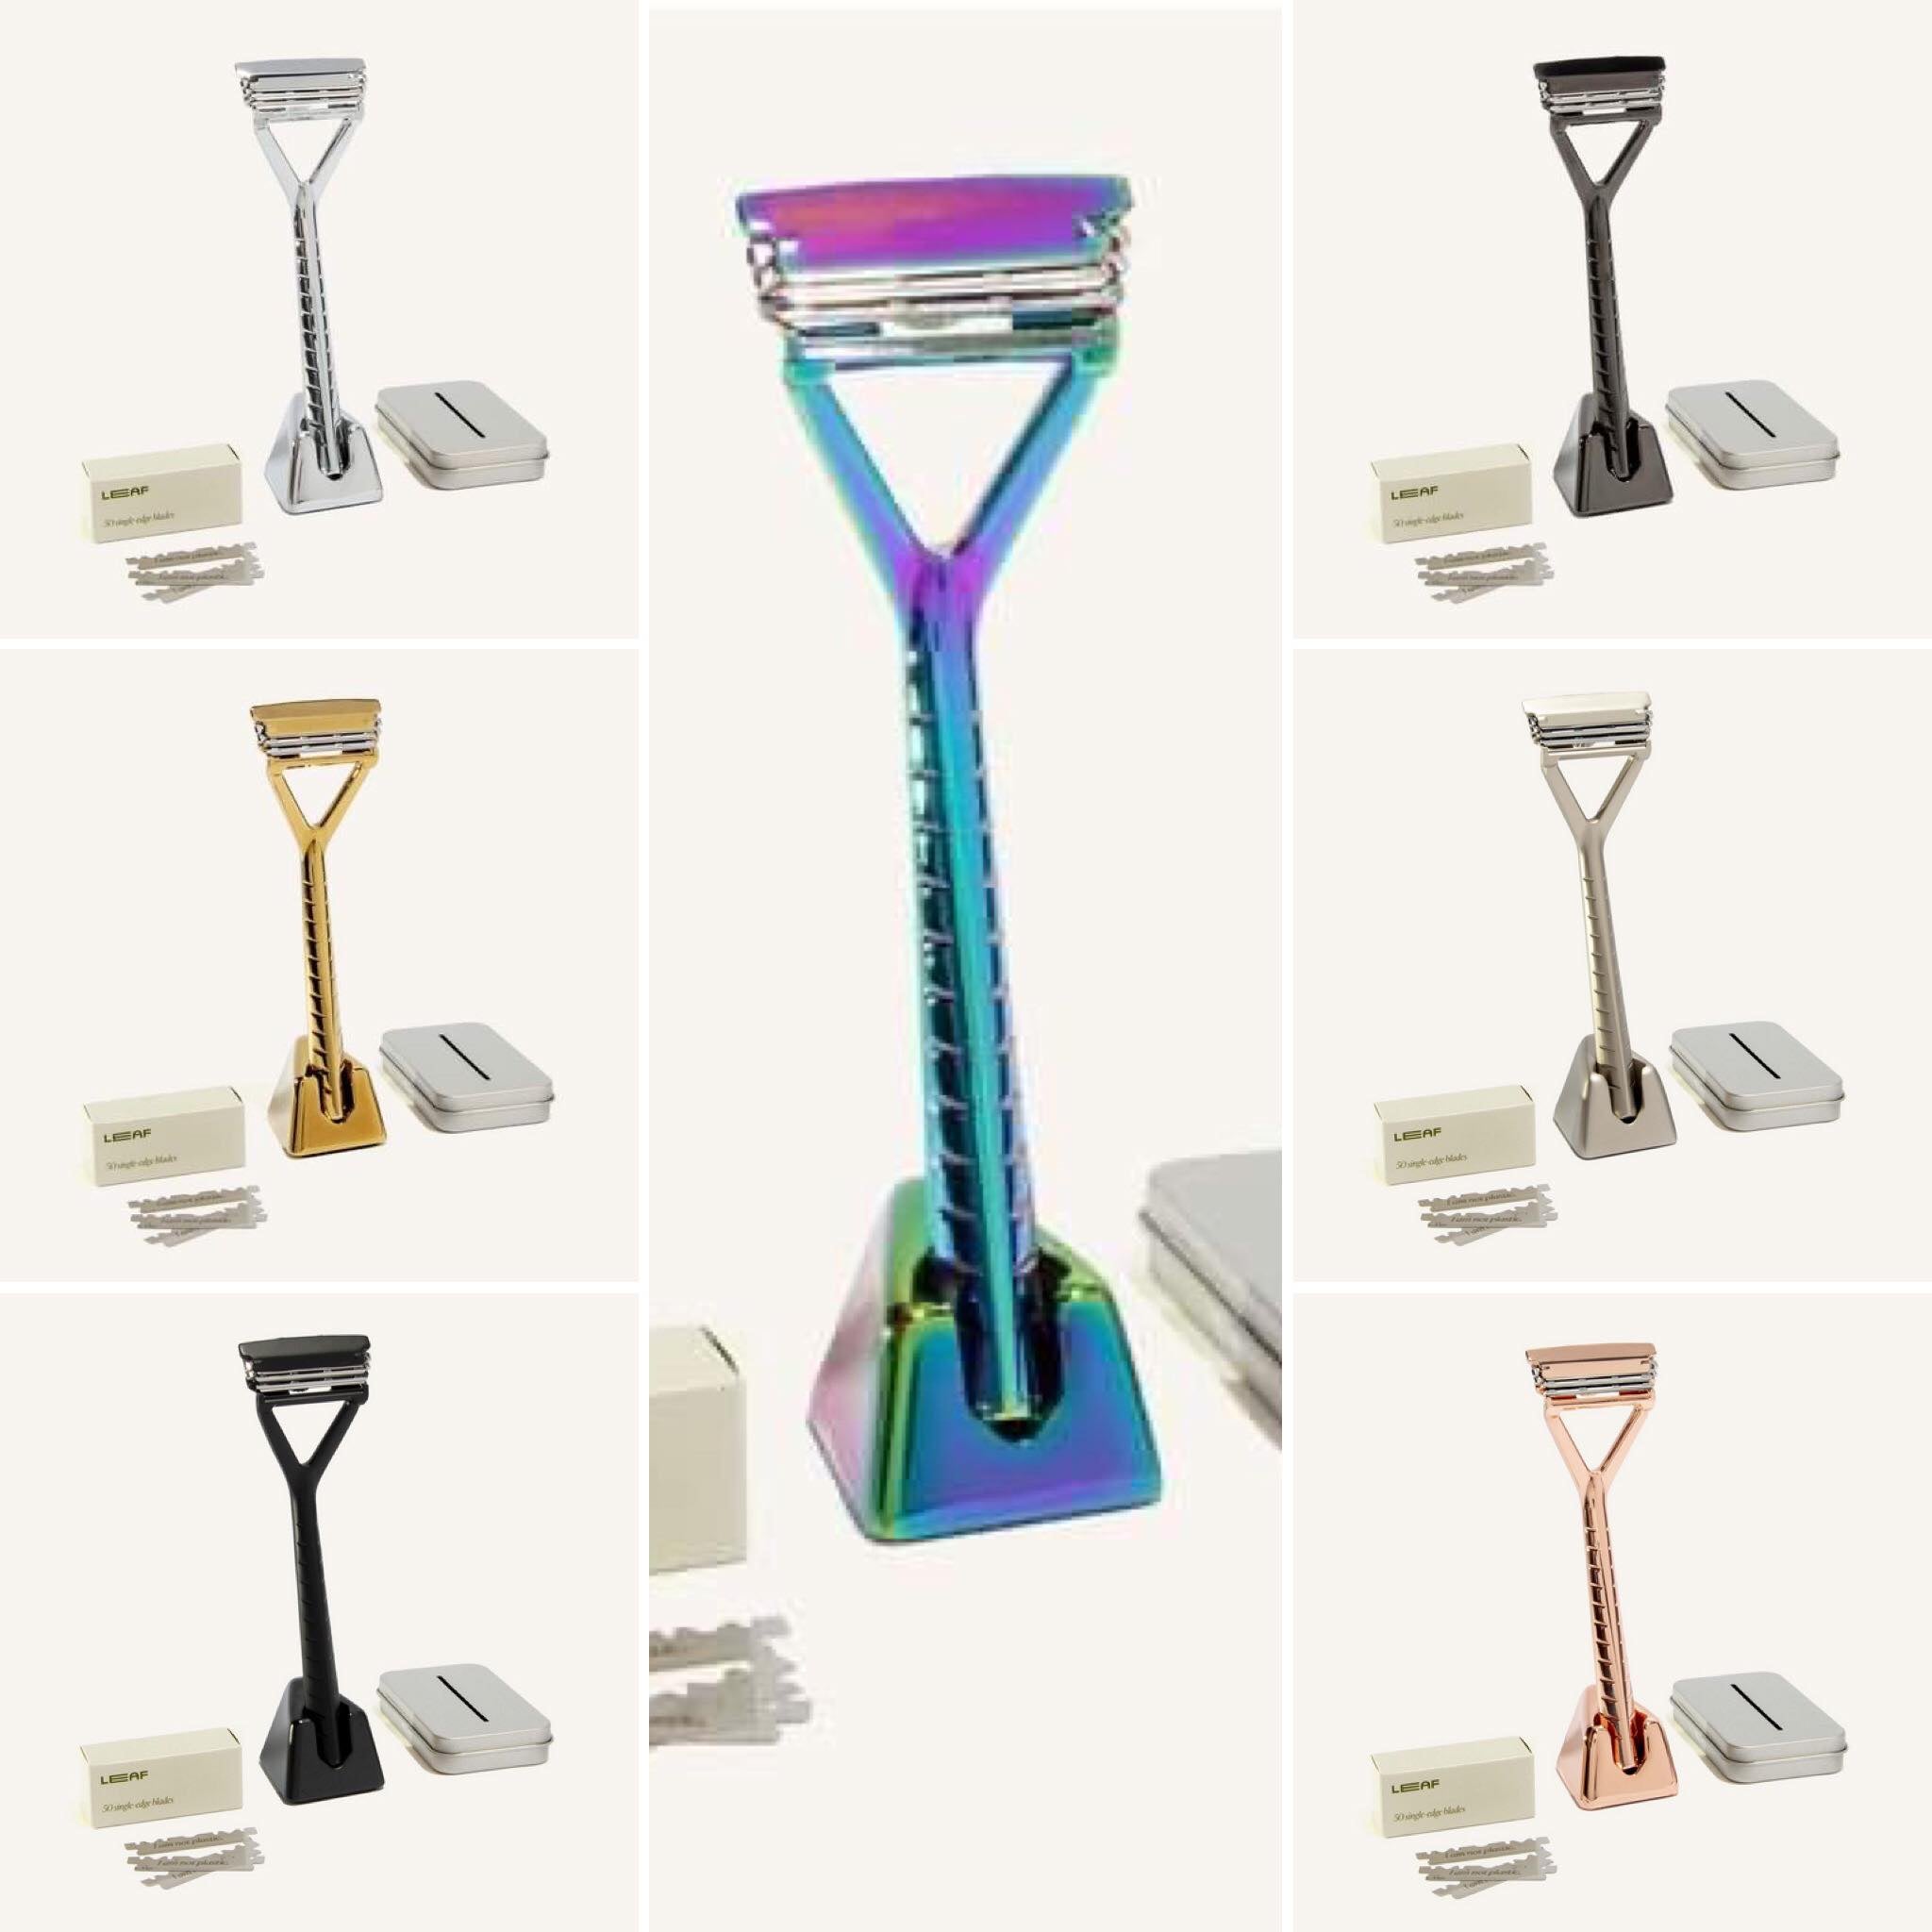 Our collection of Leaf Shave Starter Kits include a pivoting head razor, leaf razor stand, pack of 50 single edge blades and a blade recycling tin and are available in 7 finishes prism, chrome, mercury, gold, silver, black and rose gold